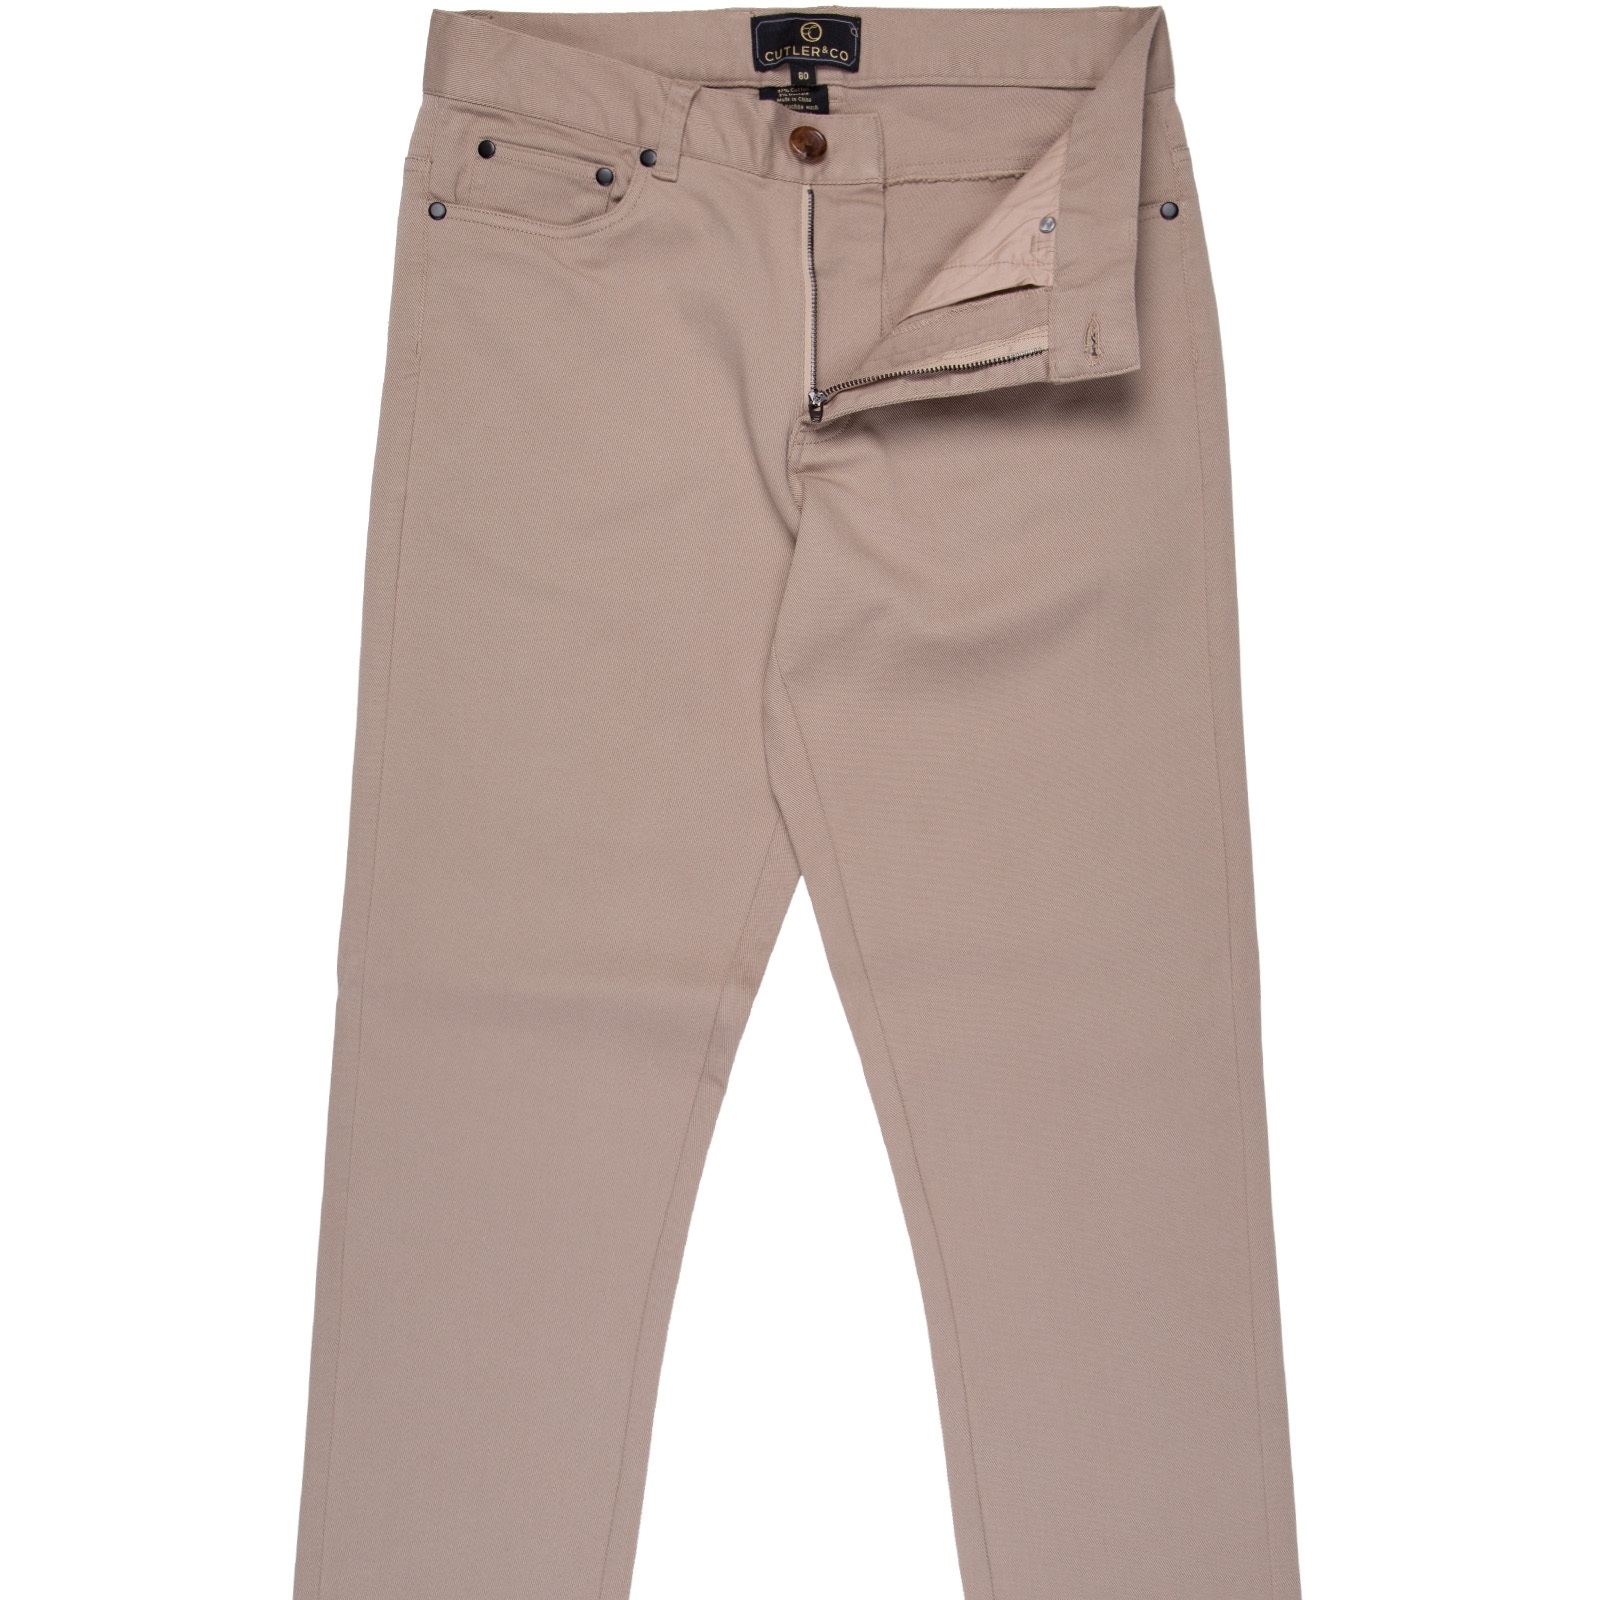 New Terry Slim Fit 5 Pocket Stretch Cotton Twill - Trousers-Casual ...